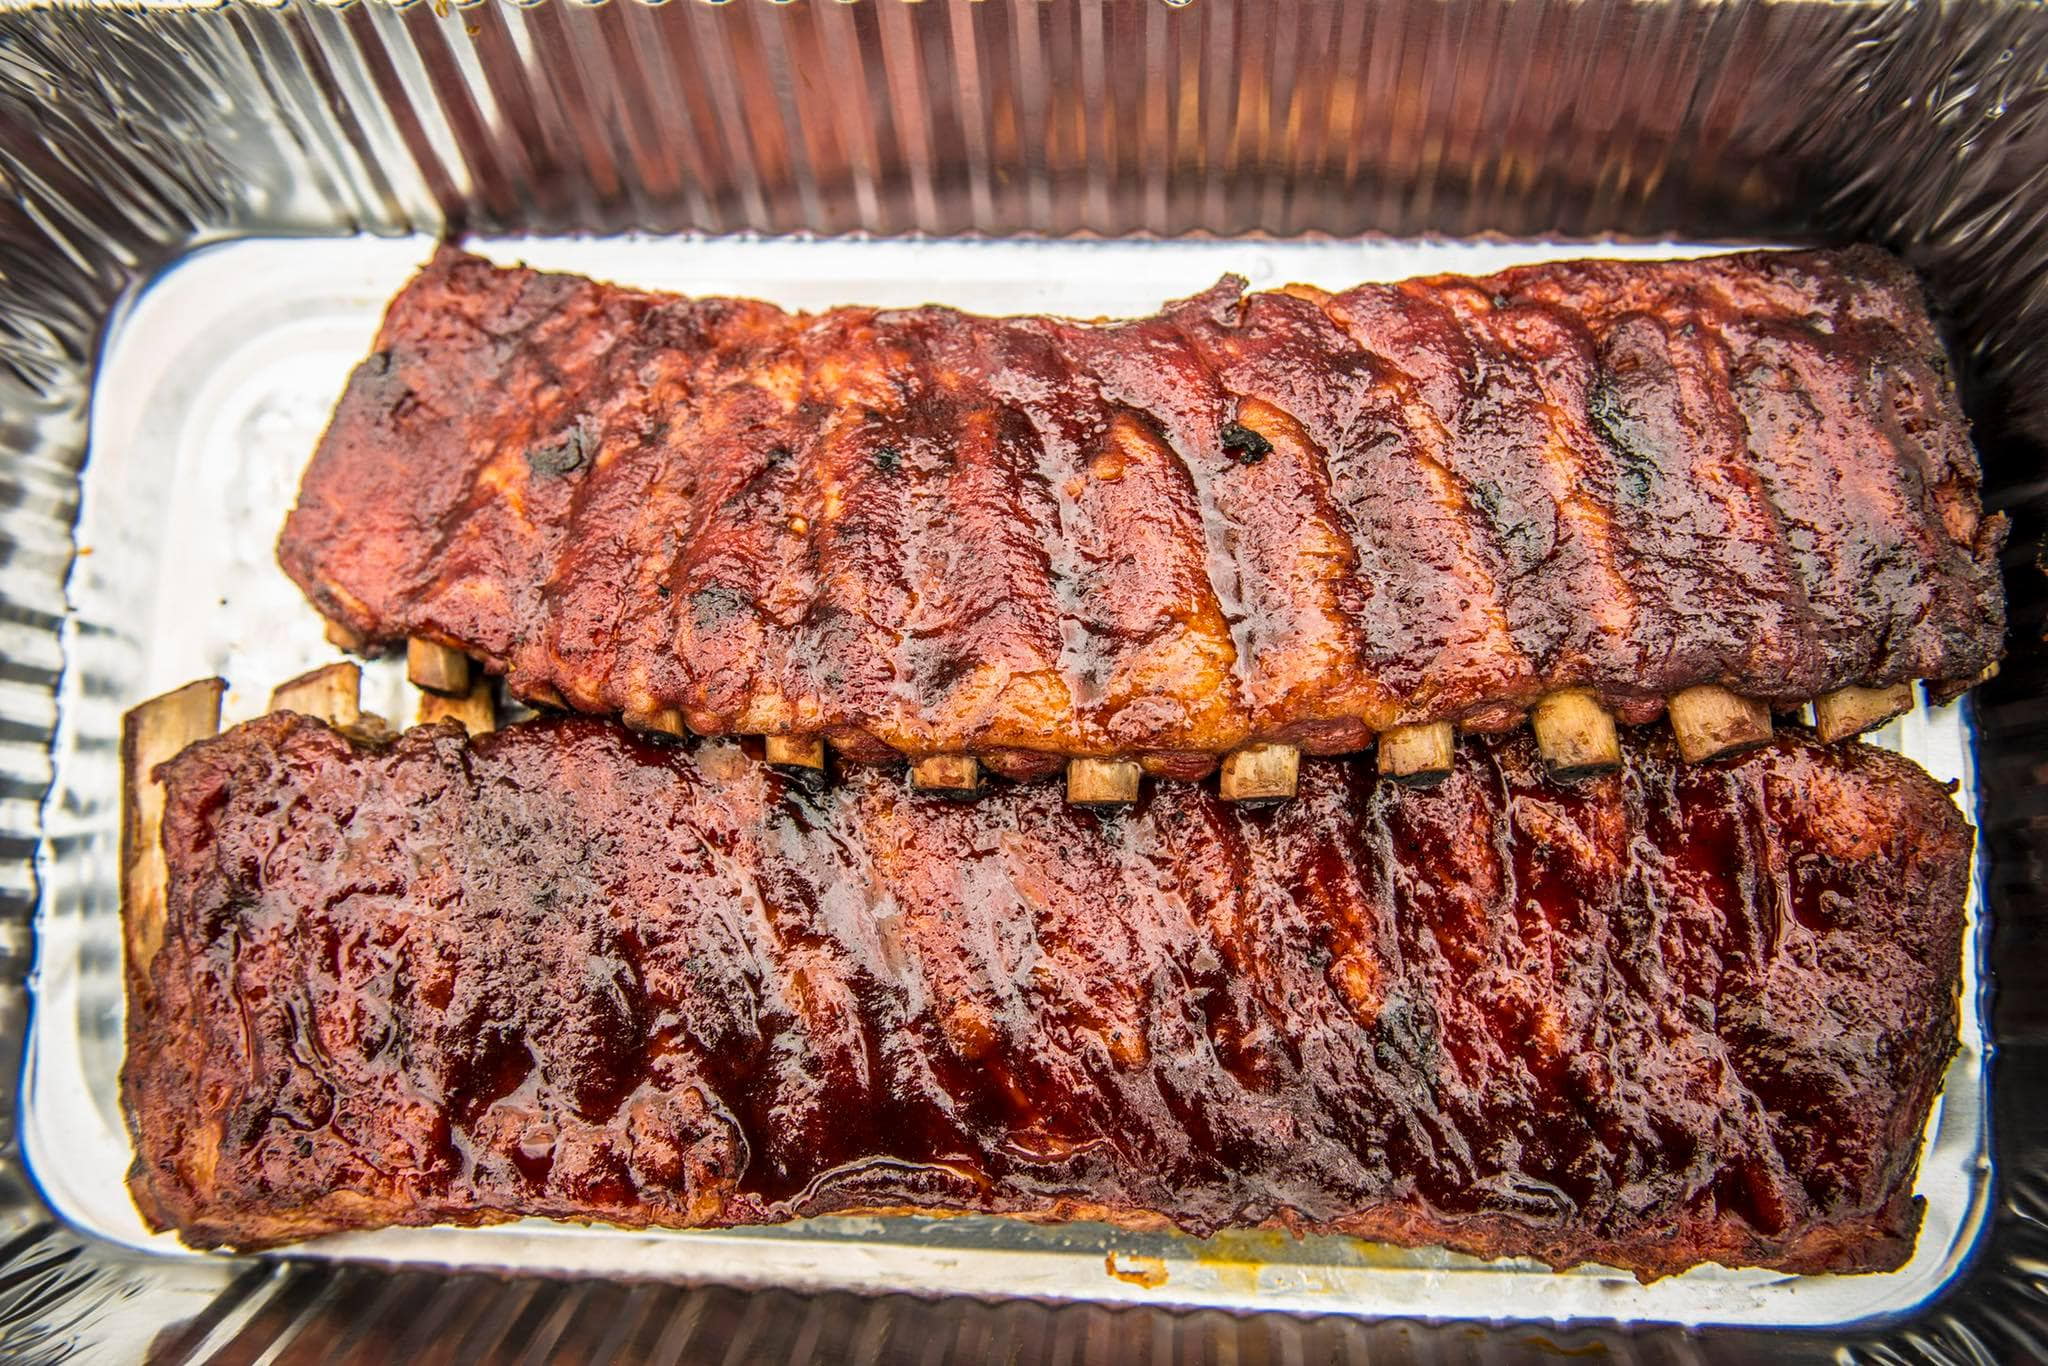 Can Ribs Be Over-Rested And Become Cold And Unappetizing